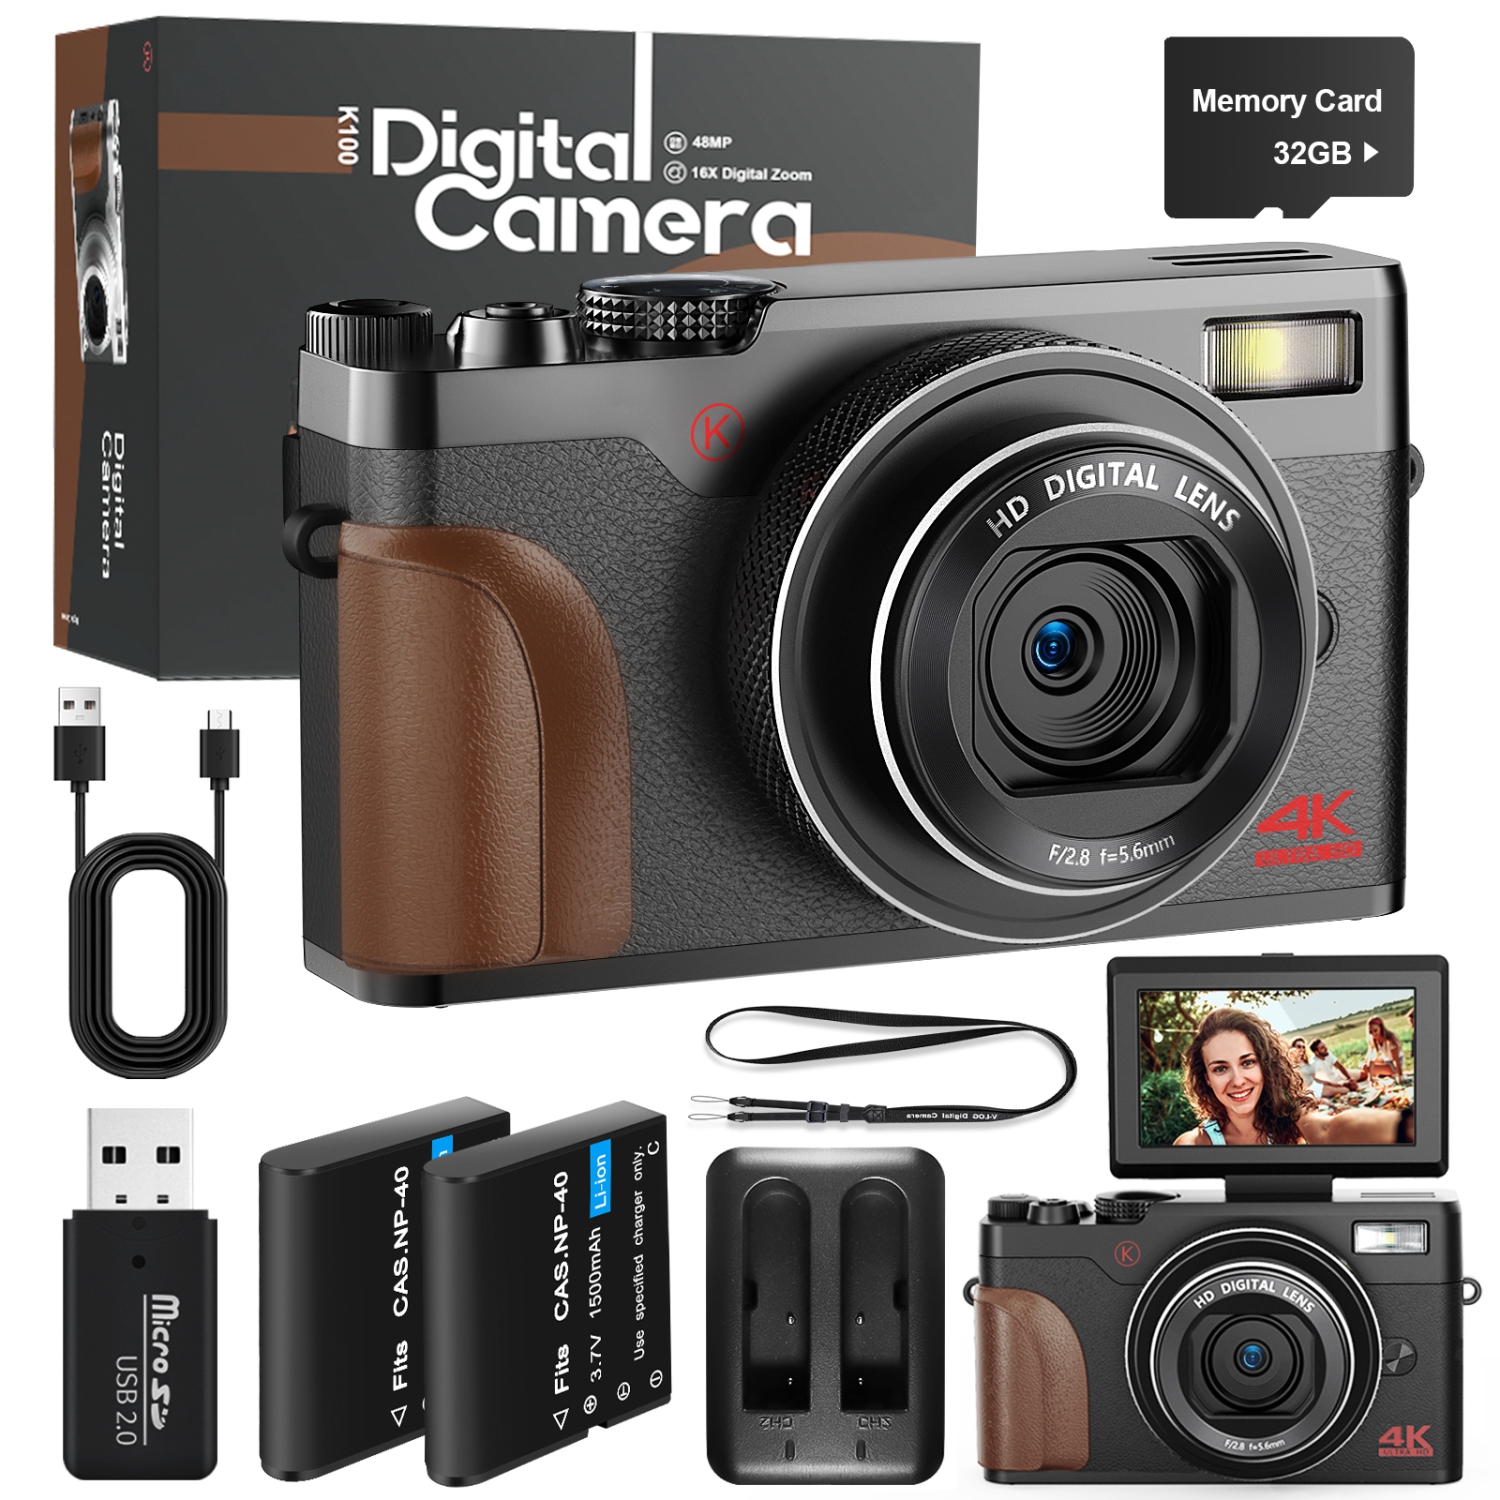 Digital Camera, Cameras for Photography,4K&48MP Video Camera, Vlogging Camera for YouTube, Compact Small Camera with Two Batteries, Digital Point and Shoot Camera with 16X Zoom